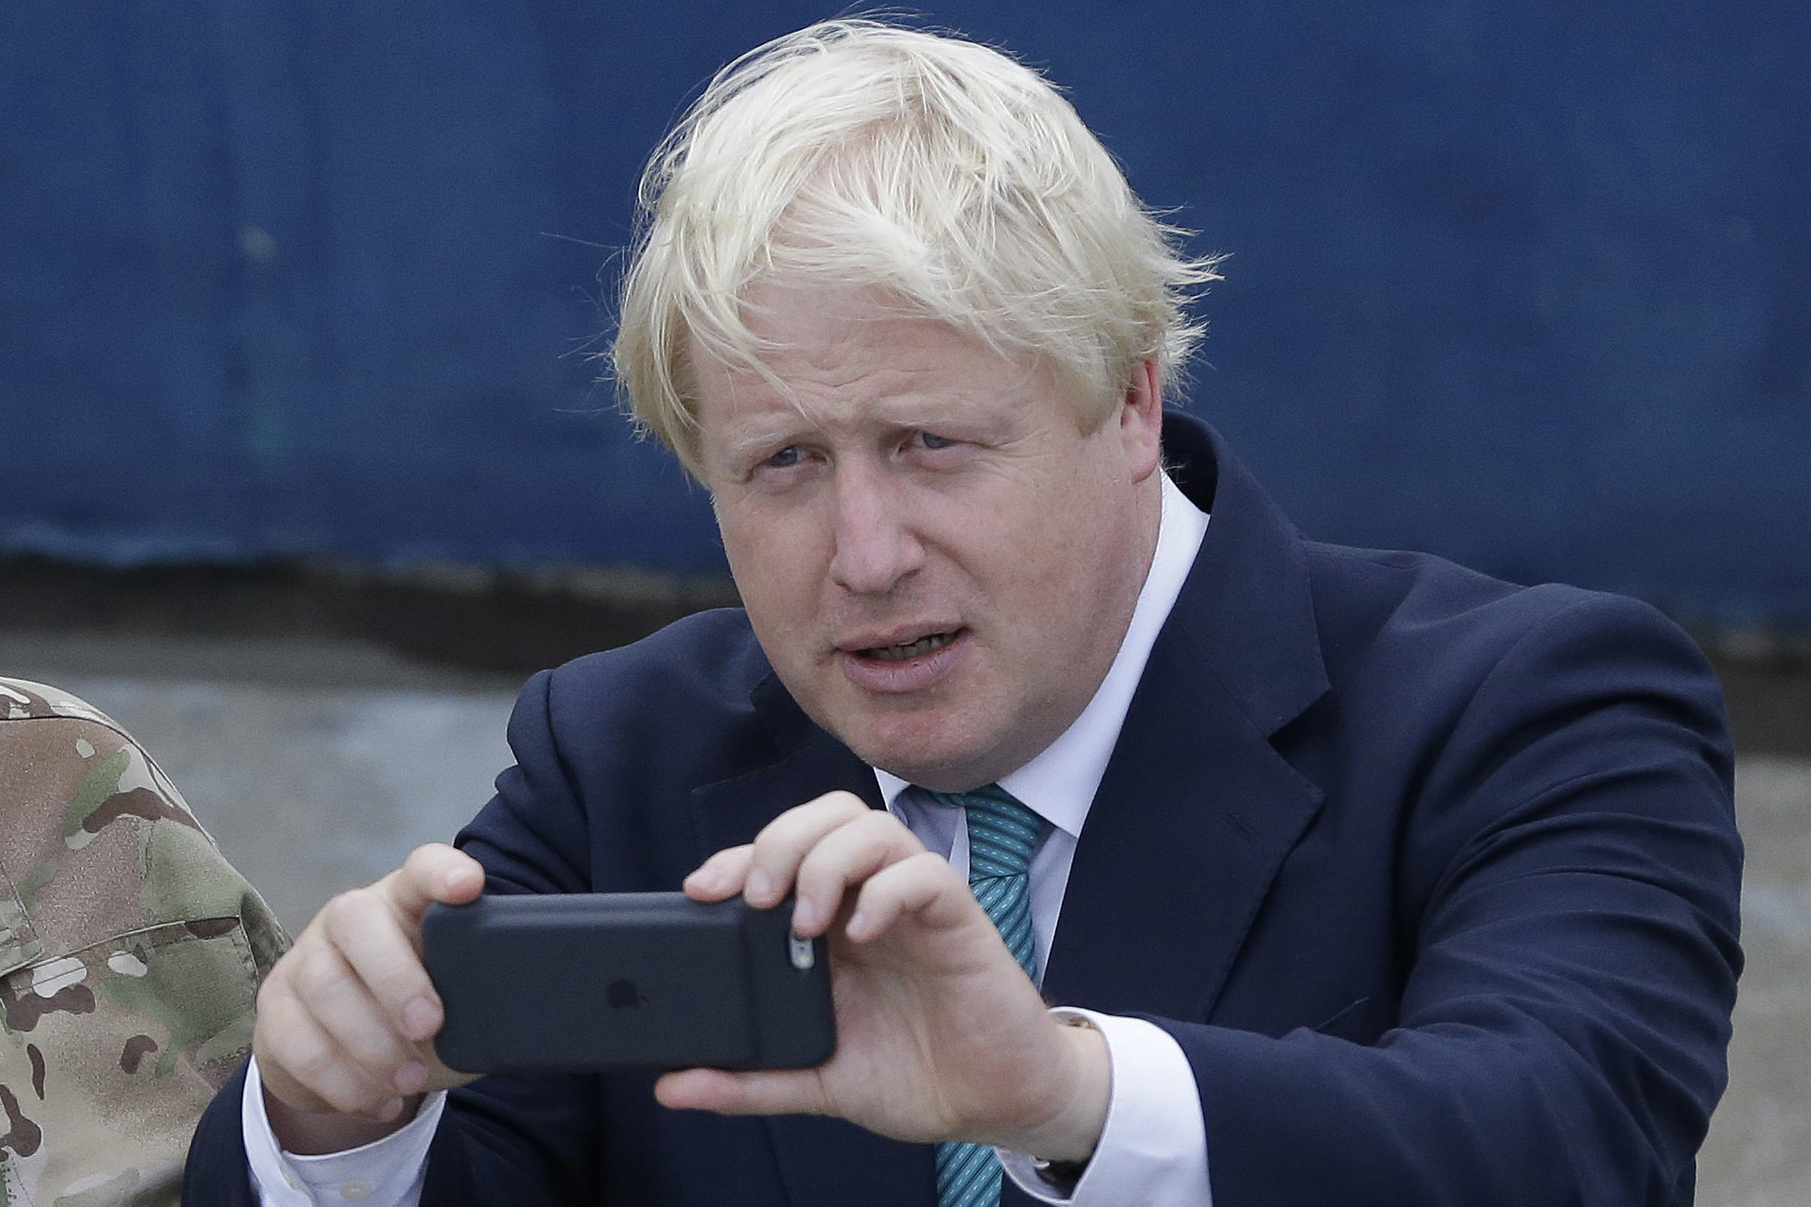 Boris Johnson calls on spooks to help turn on old mobile phone in bizarre twist to Covid inquiry row